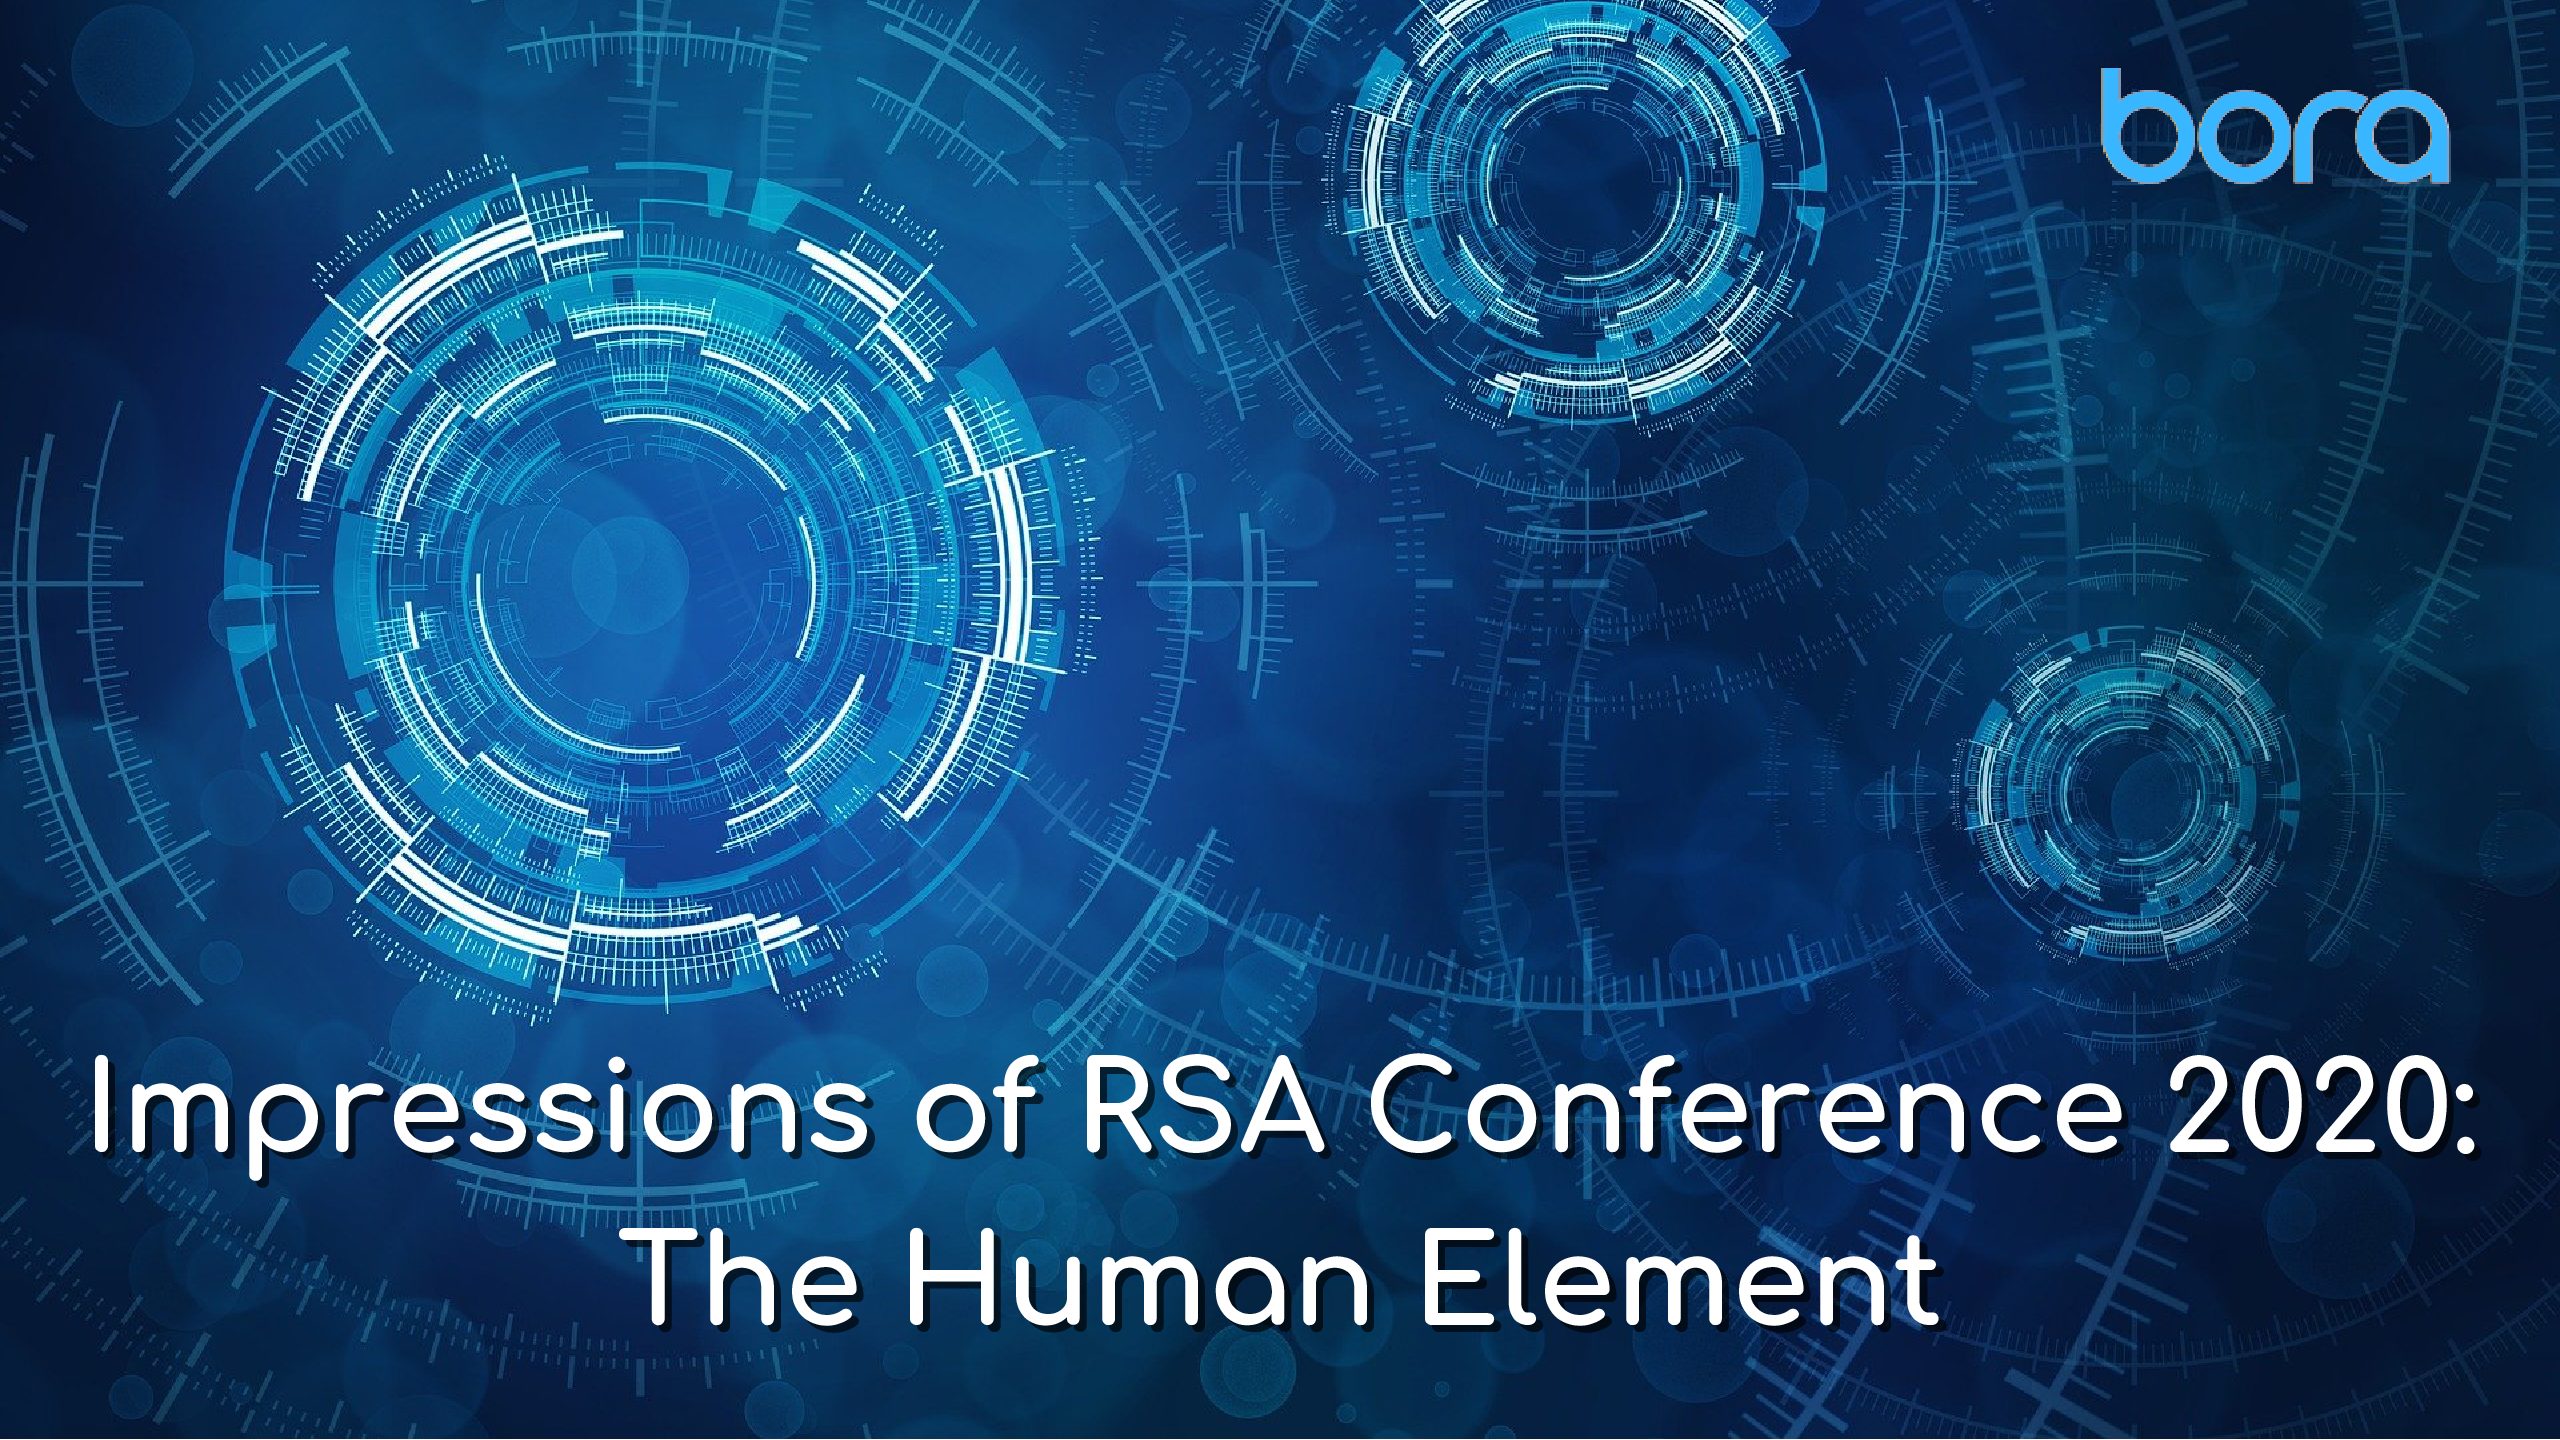 Impressions of RSA Conference 2020: The Human Element